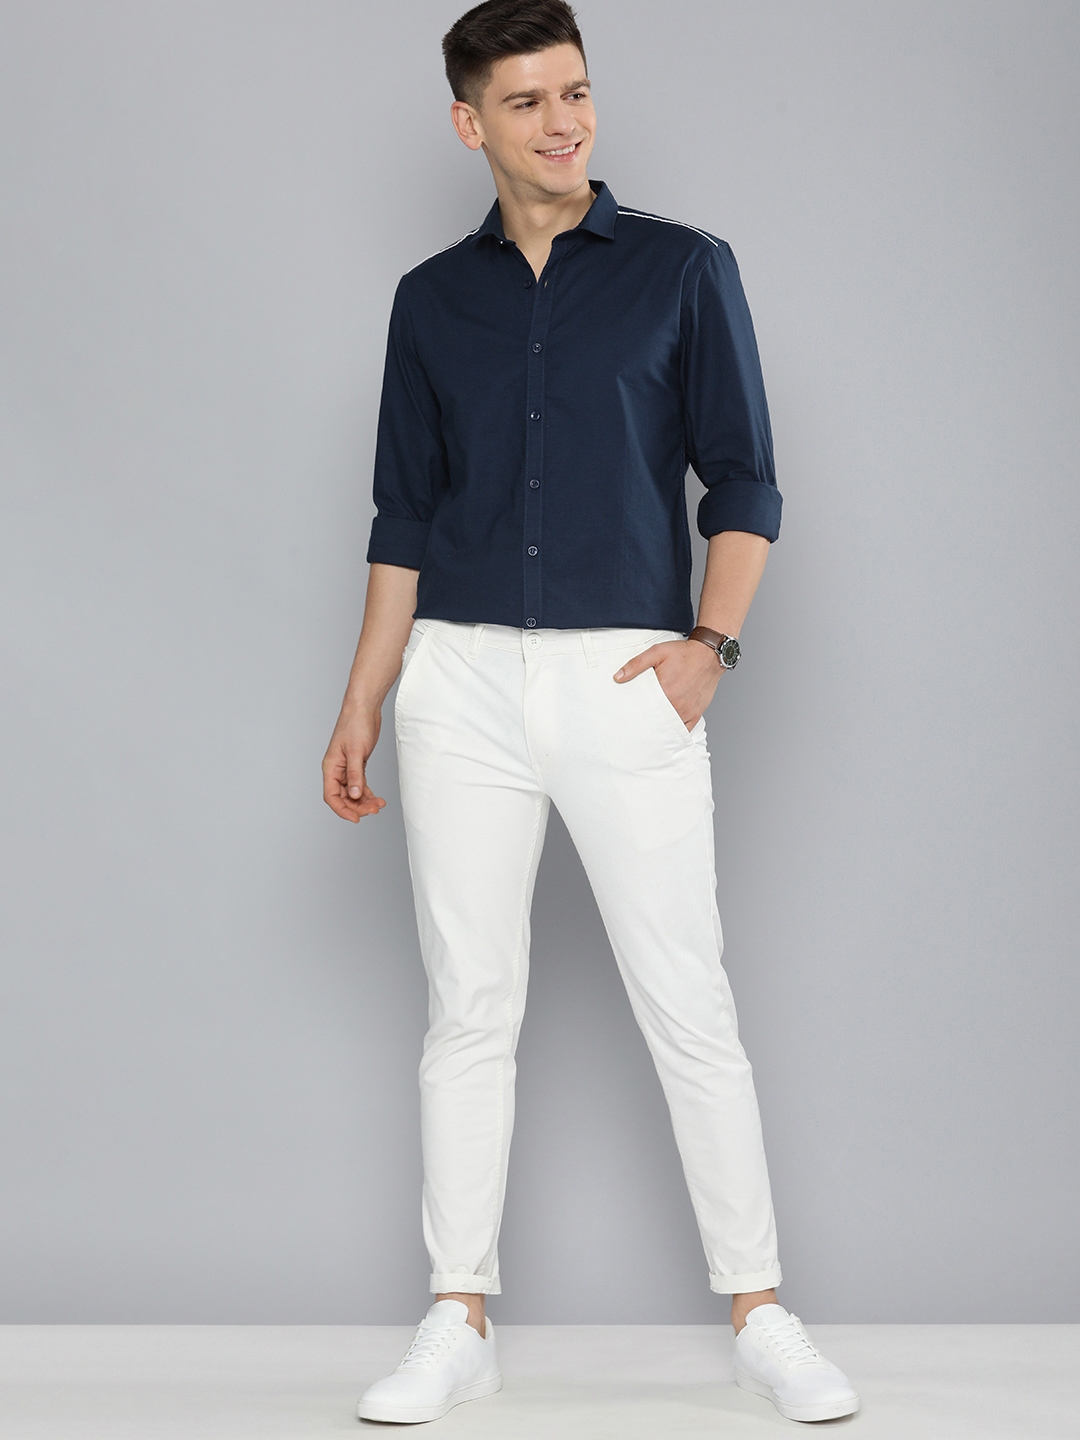 Buy Mast & Harbour Men Blue Solid Casual Pure Cotton Sustainable